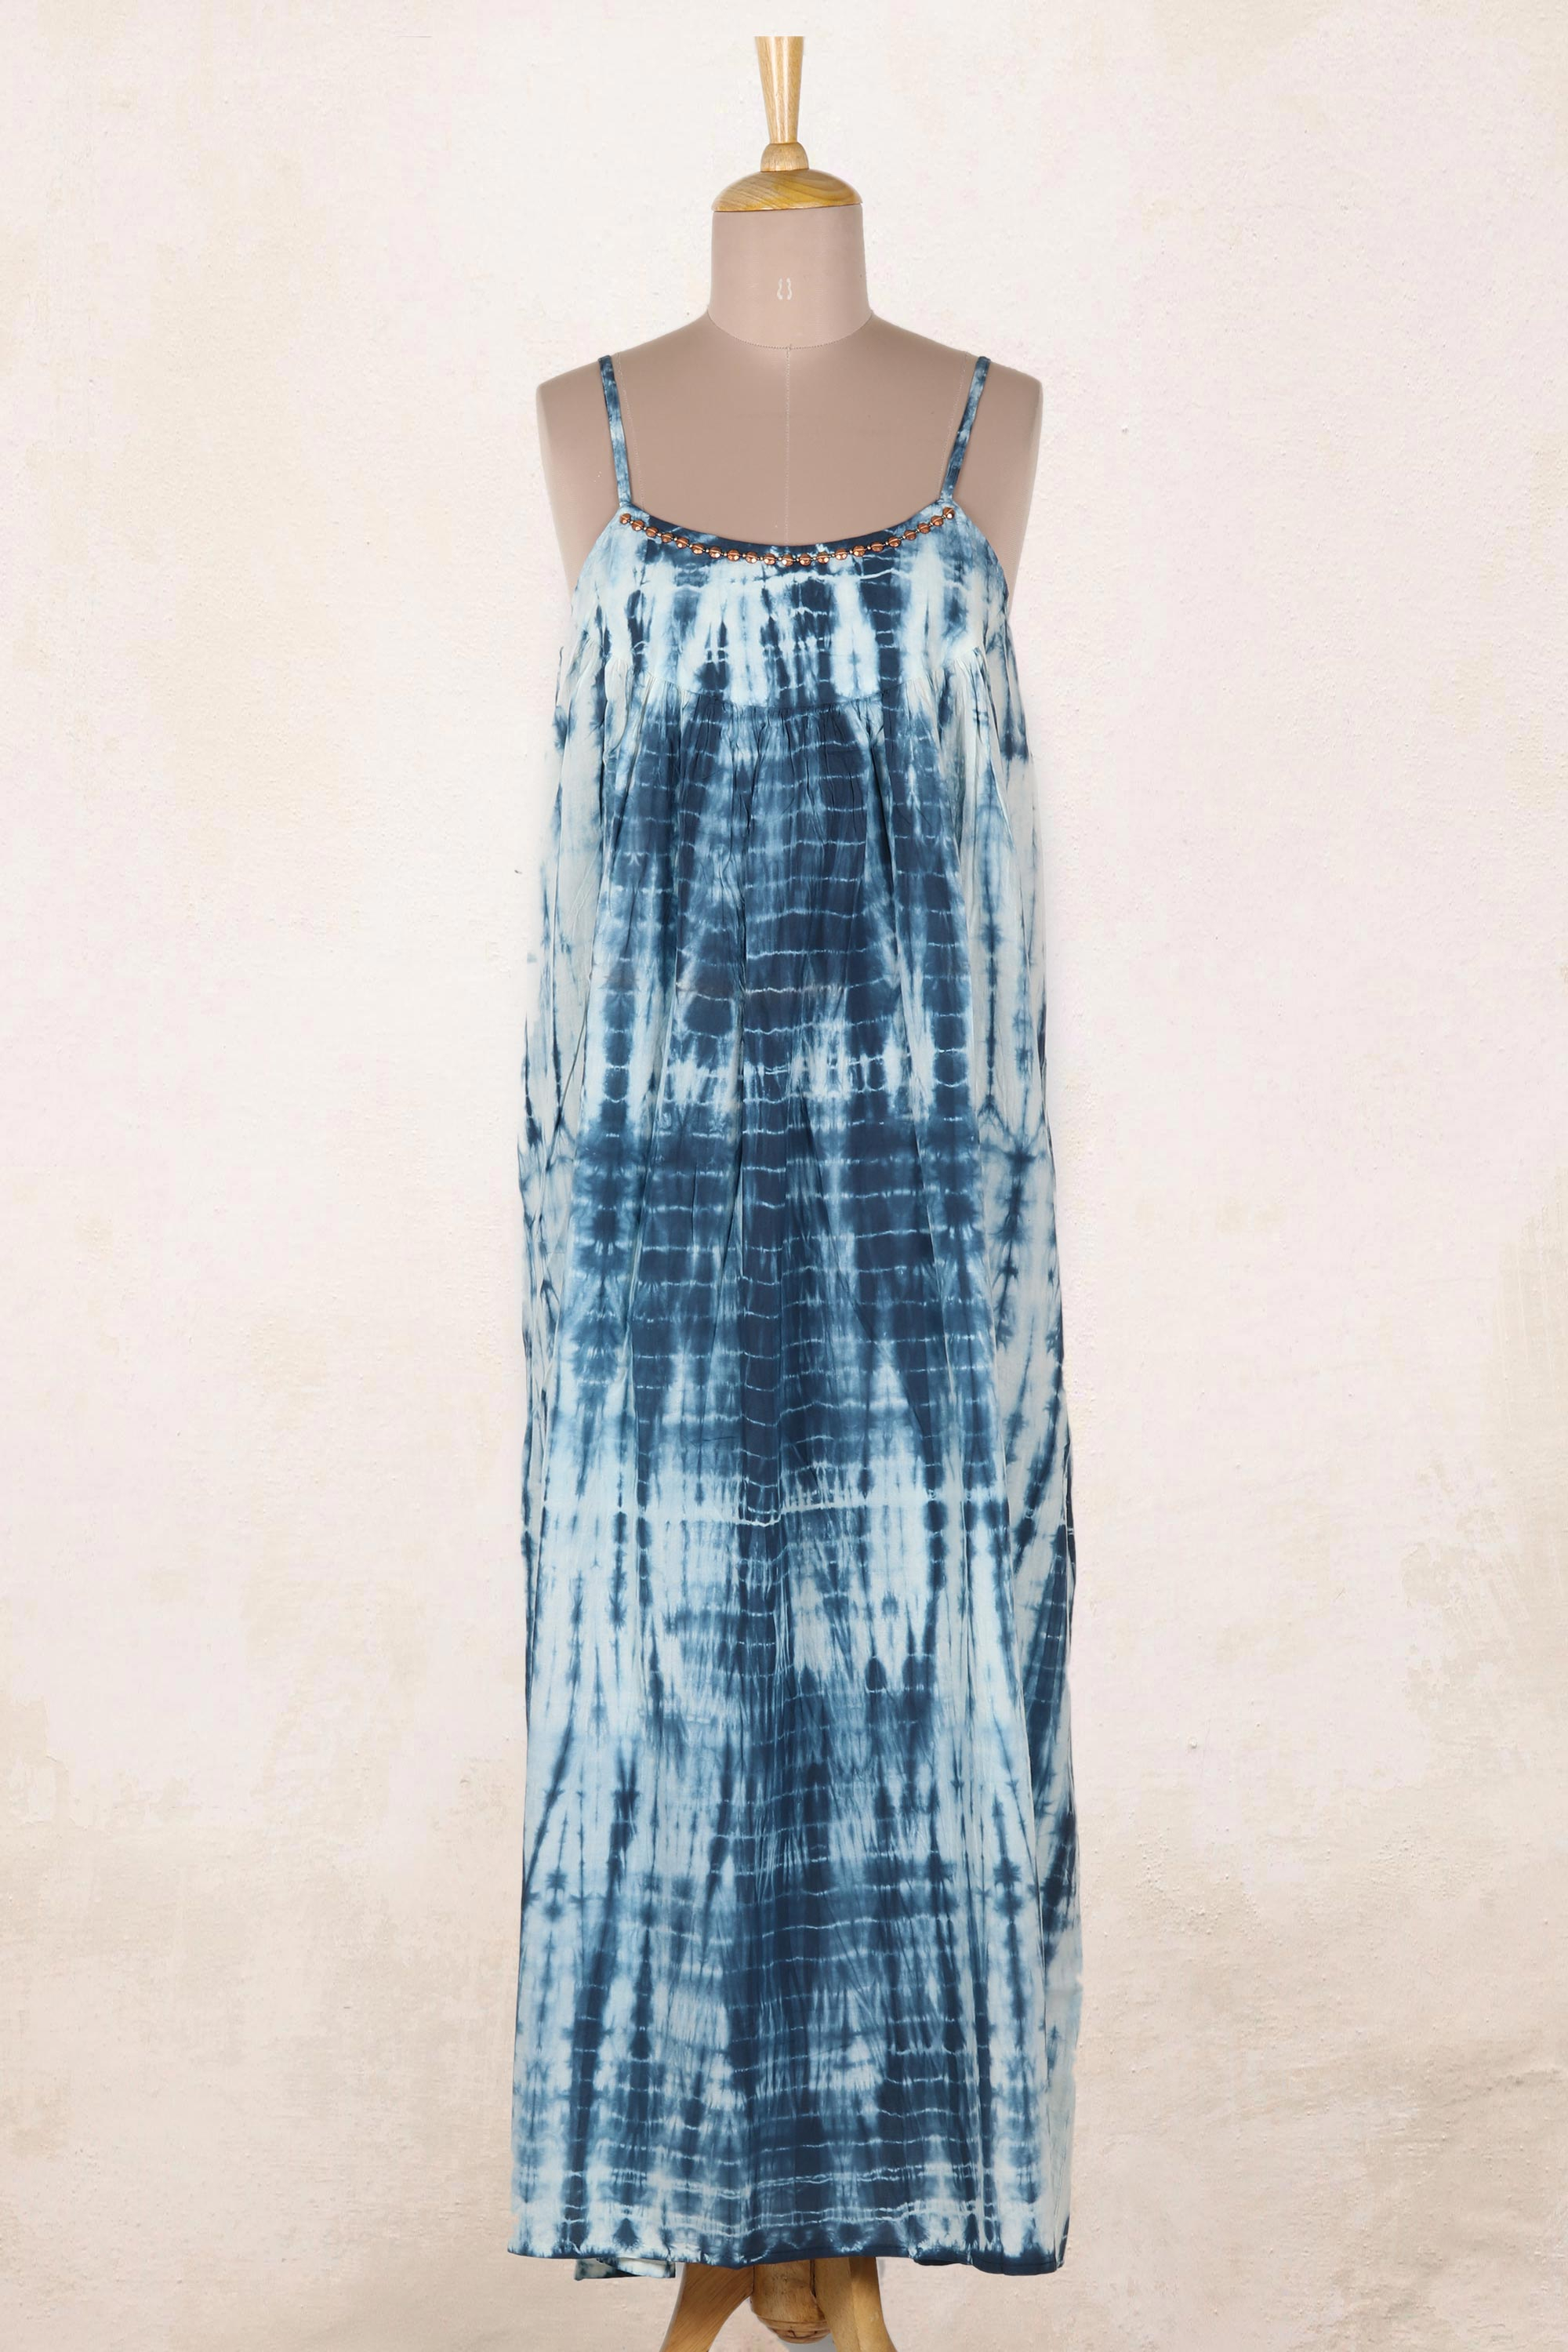 Tie-Dyed Cotton Long Dress in Navy from India - Navy Rain | NOVICA